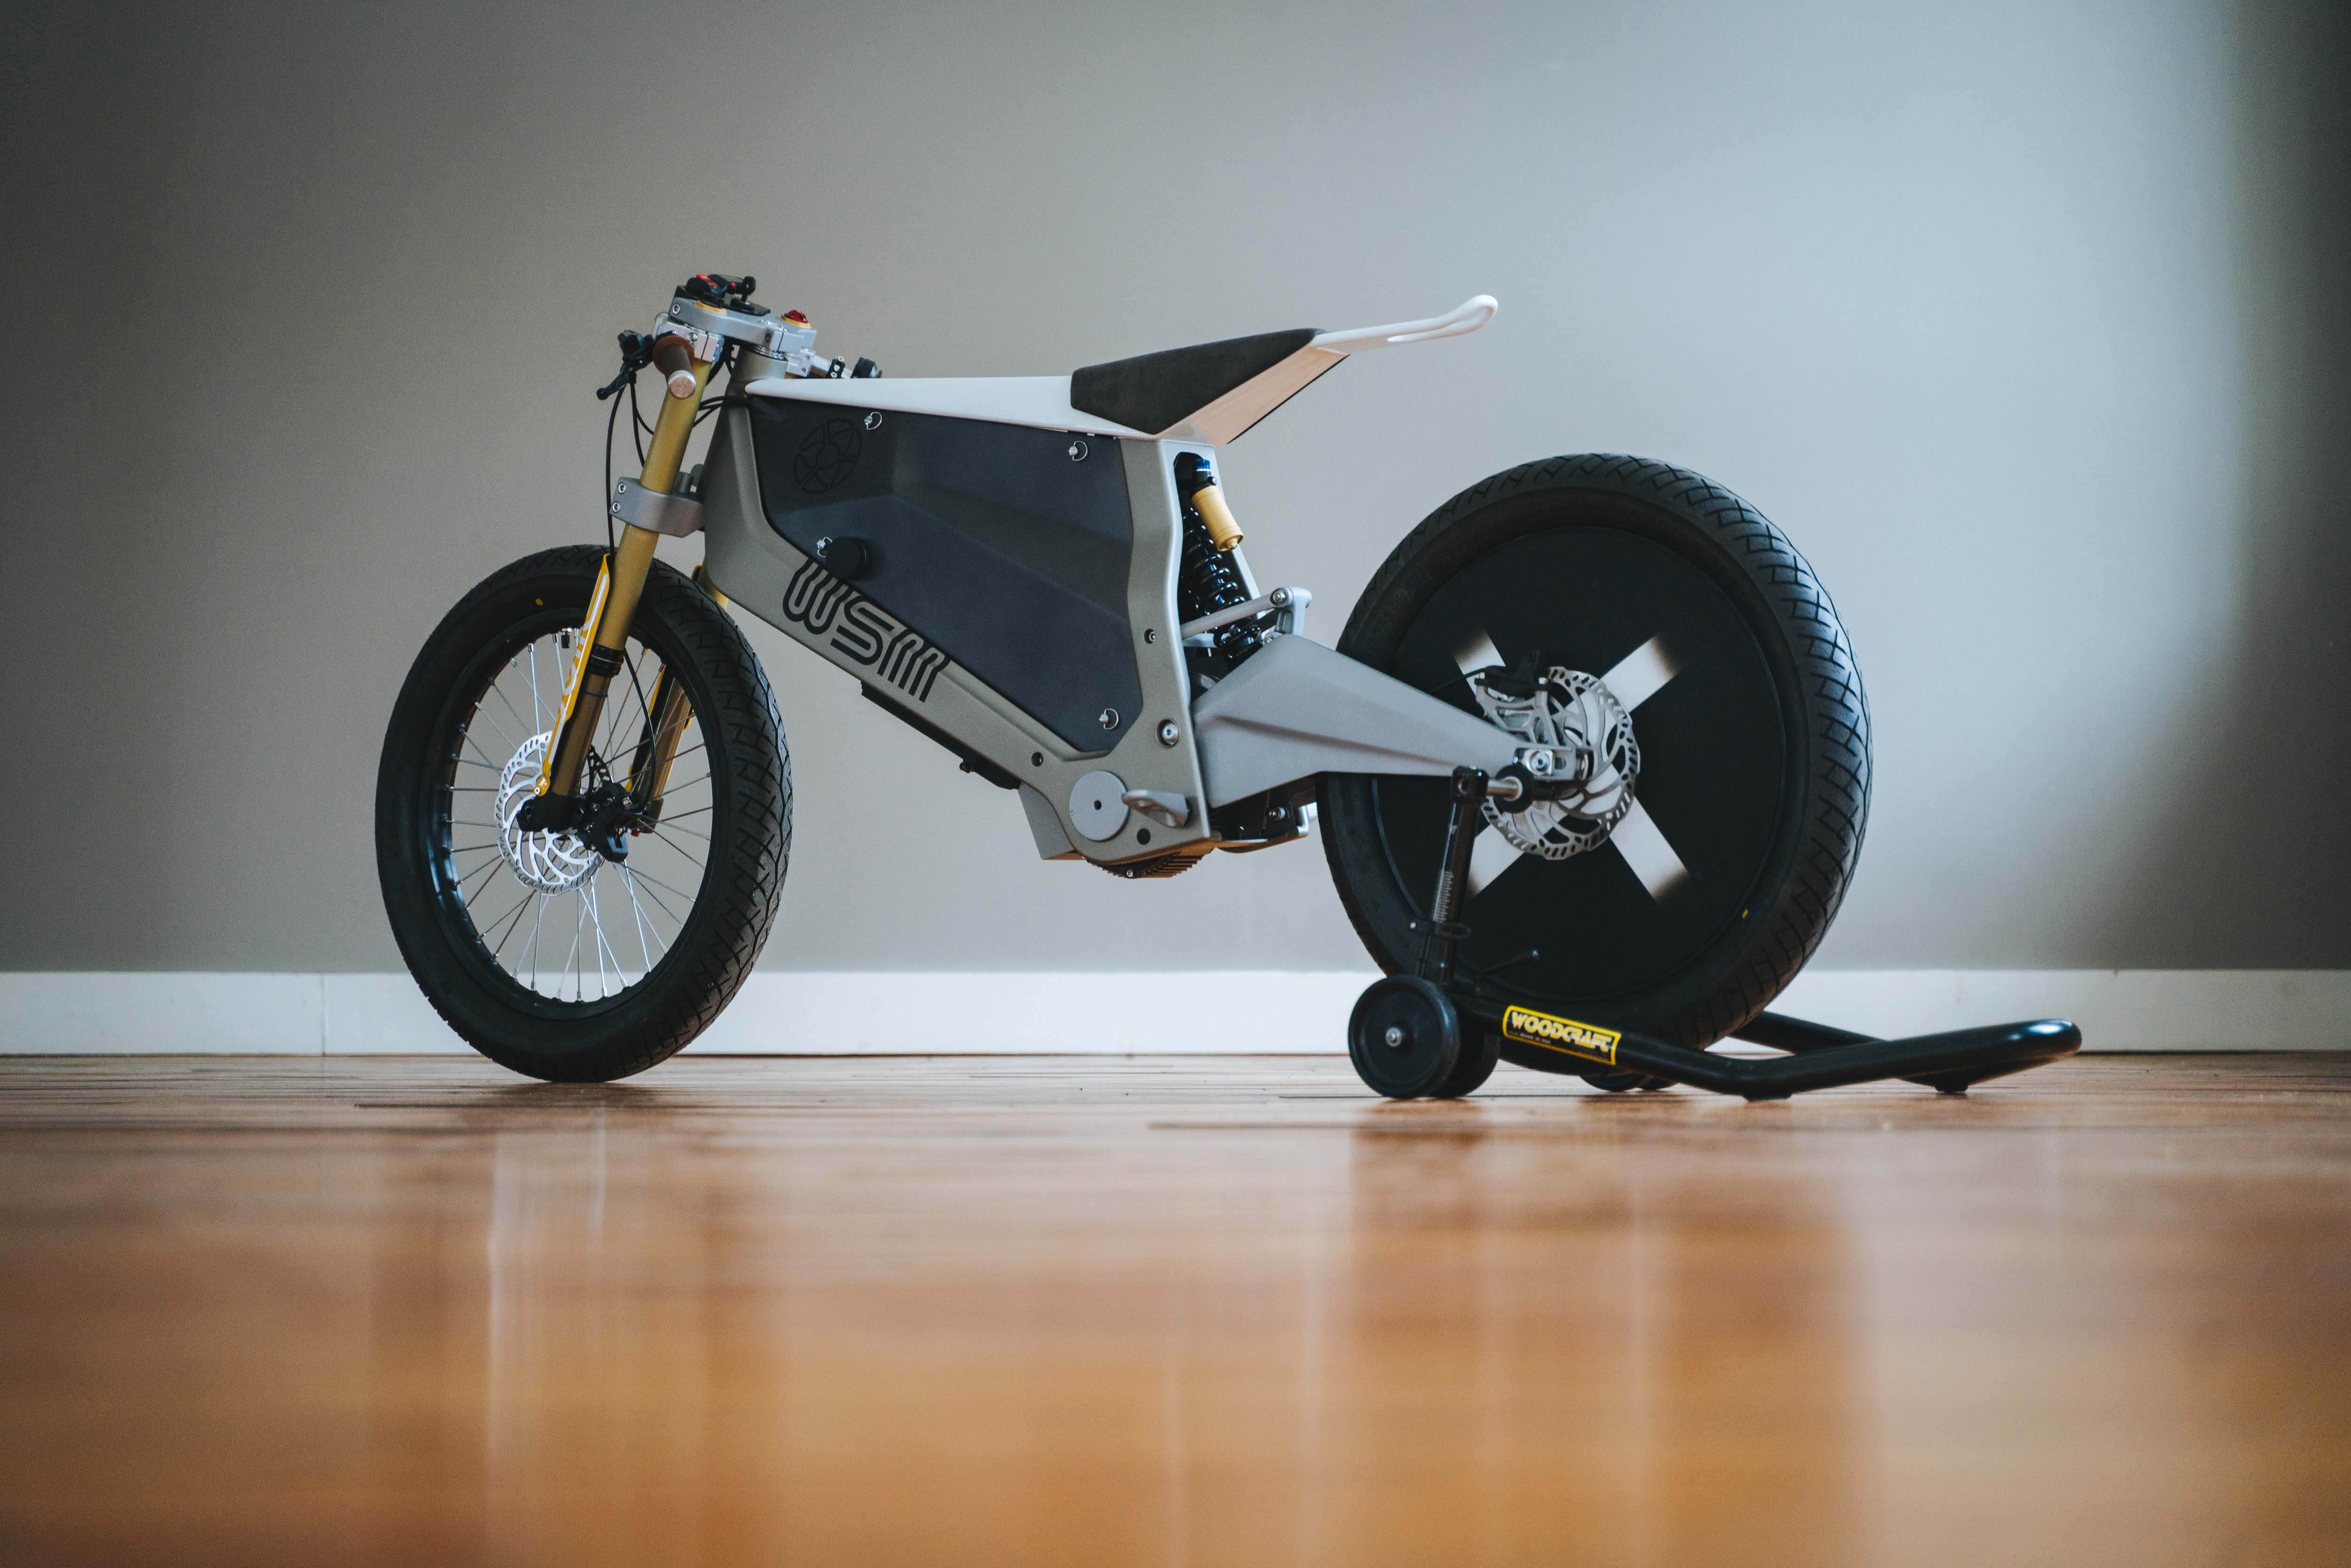 This Electric Motorcycle Truly Redefines The Way We Look At Electrics | BikeDekho